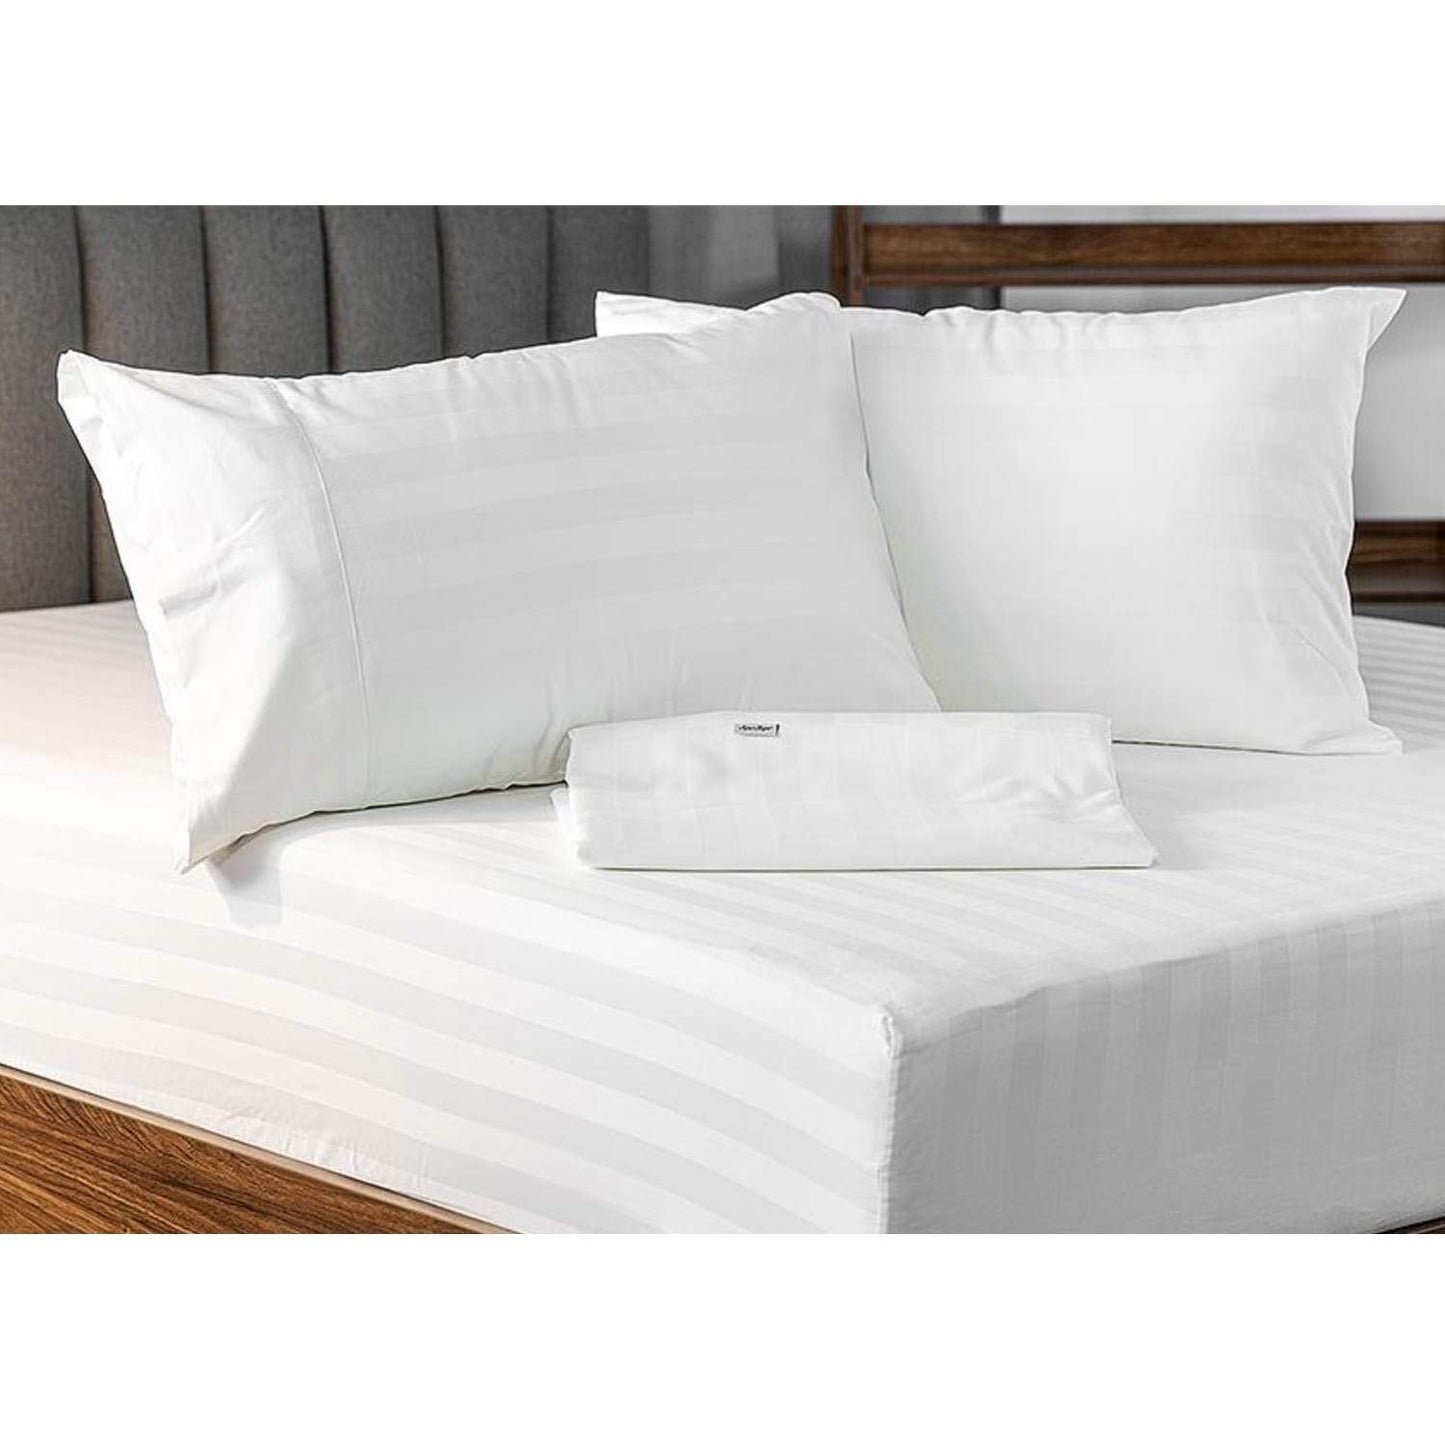 Royal Deluxe Breathable Cotton Dream Sheet Set on a bed with an extra folded sheet